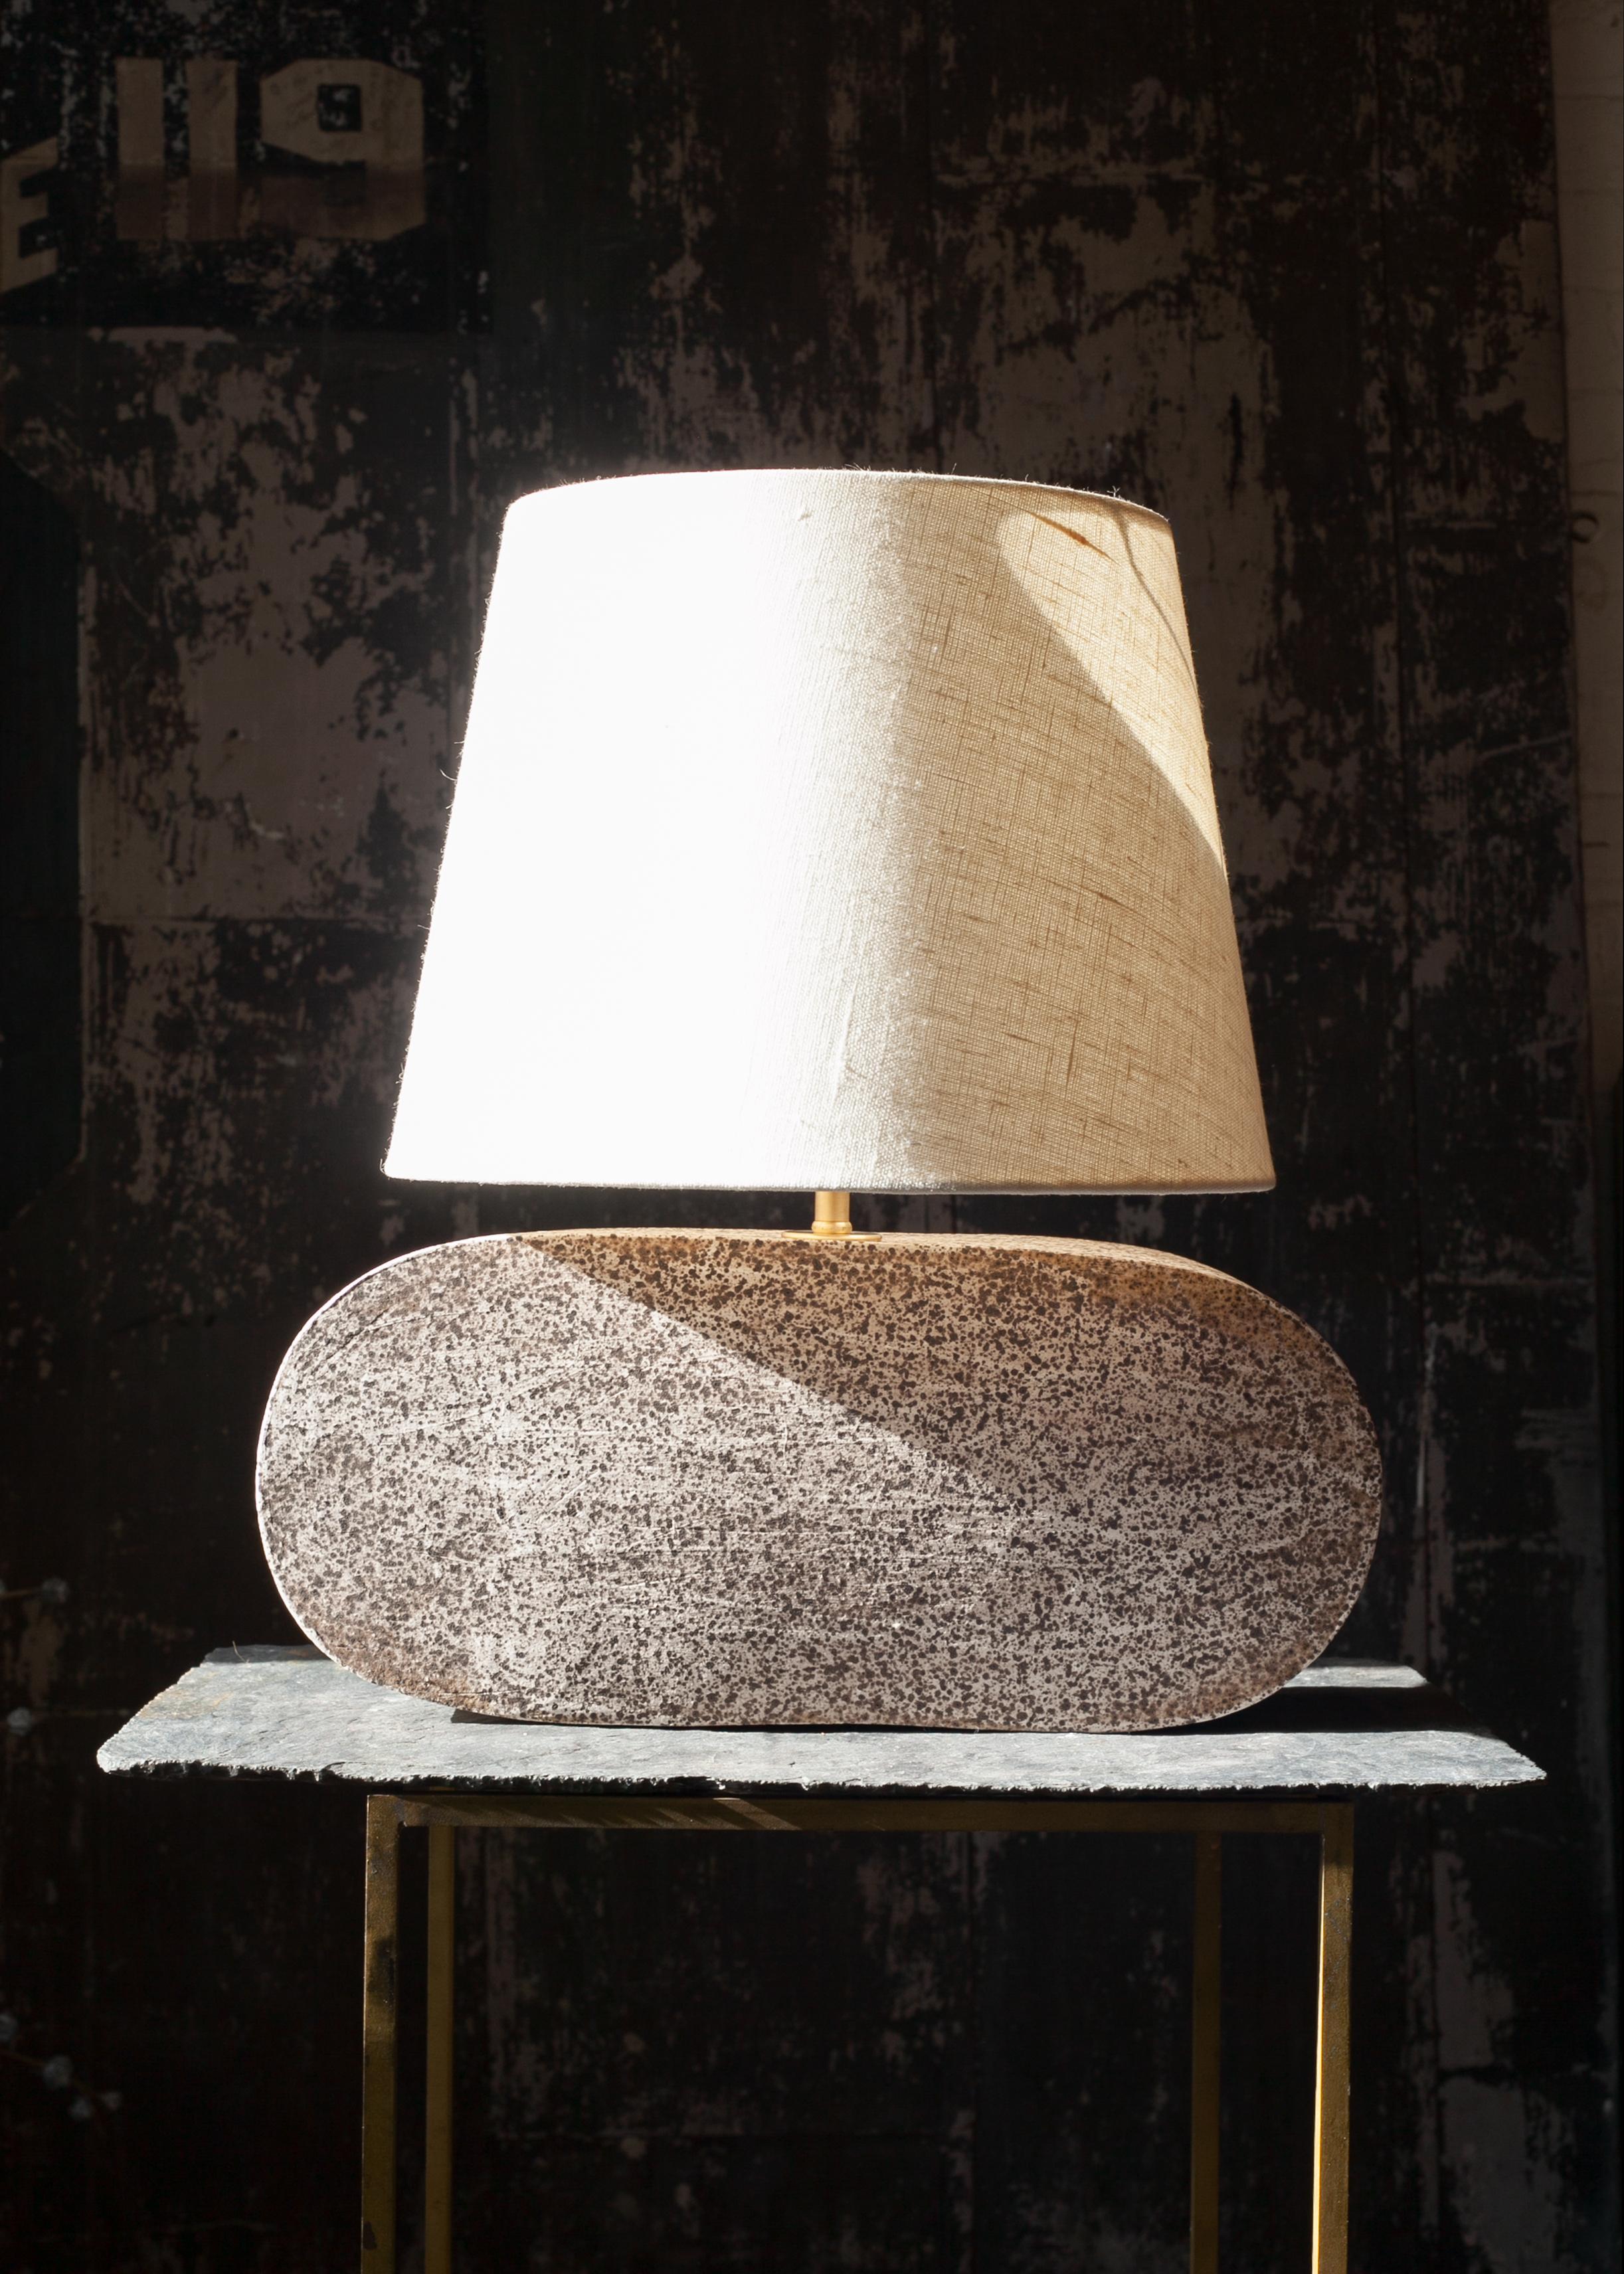 One of a kind ceramic lamp, hand built and assembled by hand. The lamp base is made with speckled clay manufactured regionally to the East Coast with custom made matte finish white glaze. This piece was inspired by seashells and smooth stones